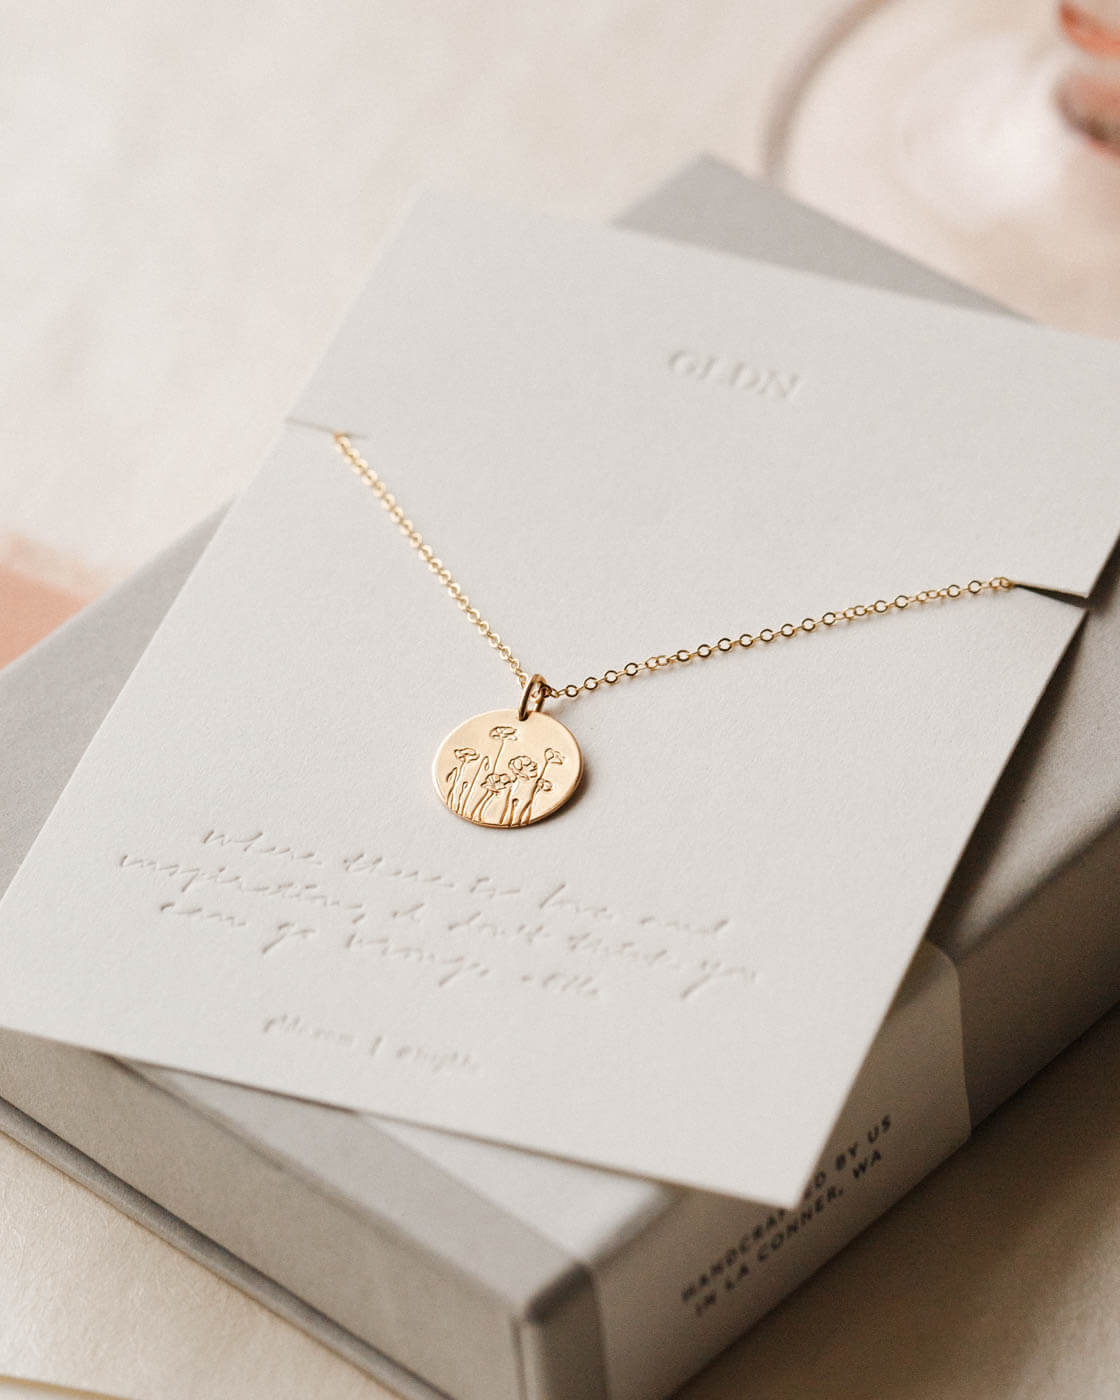 GLDN Flower Personalized Necklace. — GLDN